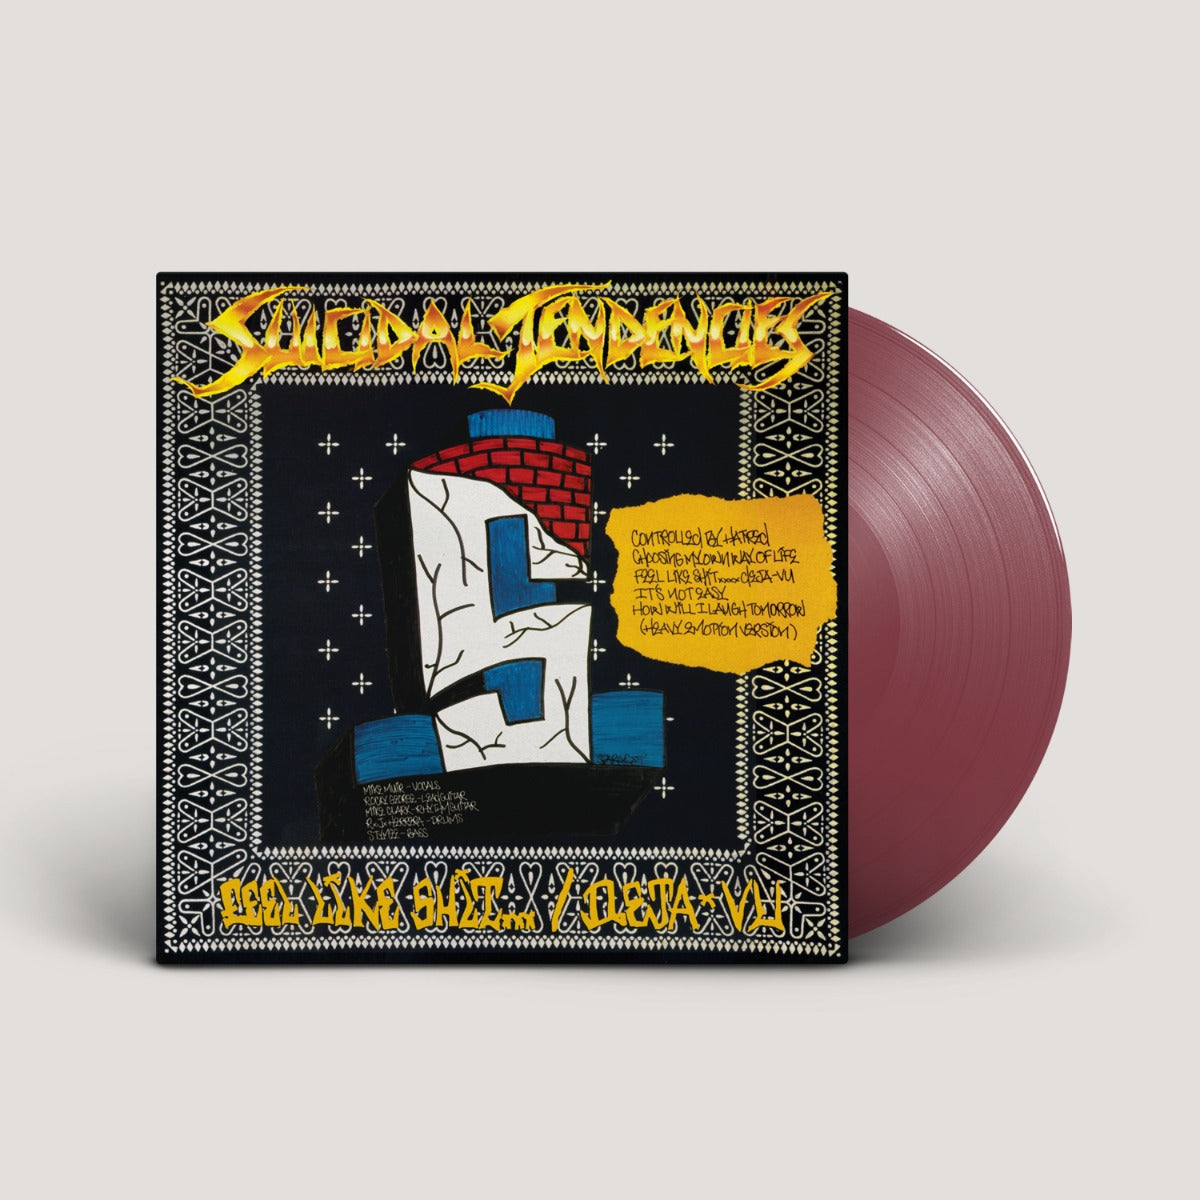 Suicidal Tendencies | Controlled By Hatred/Feel Like Shit...Deja Vu (Indie Excliusive, Friut Punch Colored Vinyl) | Vinyl